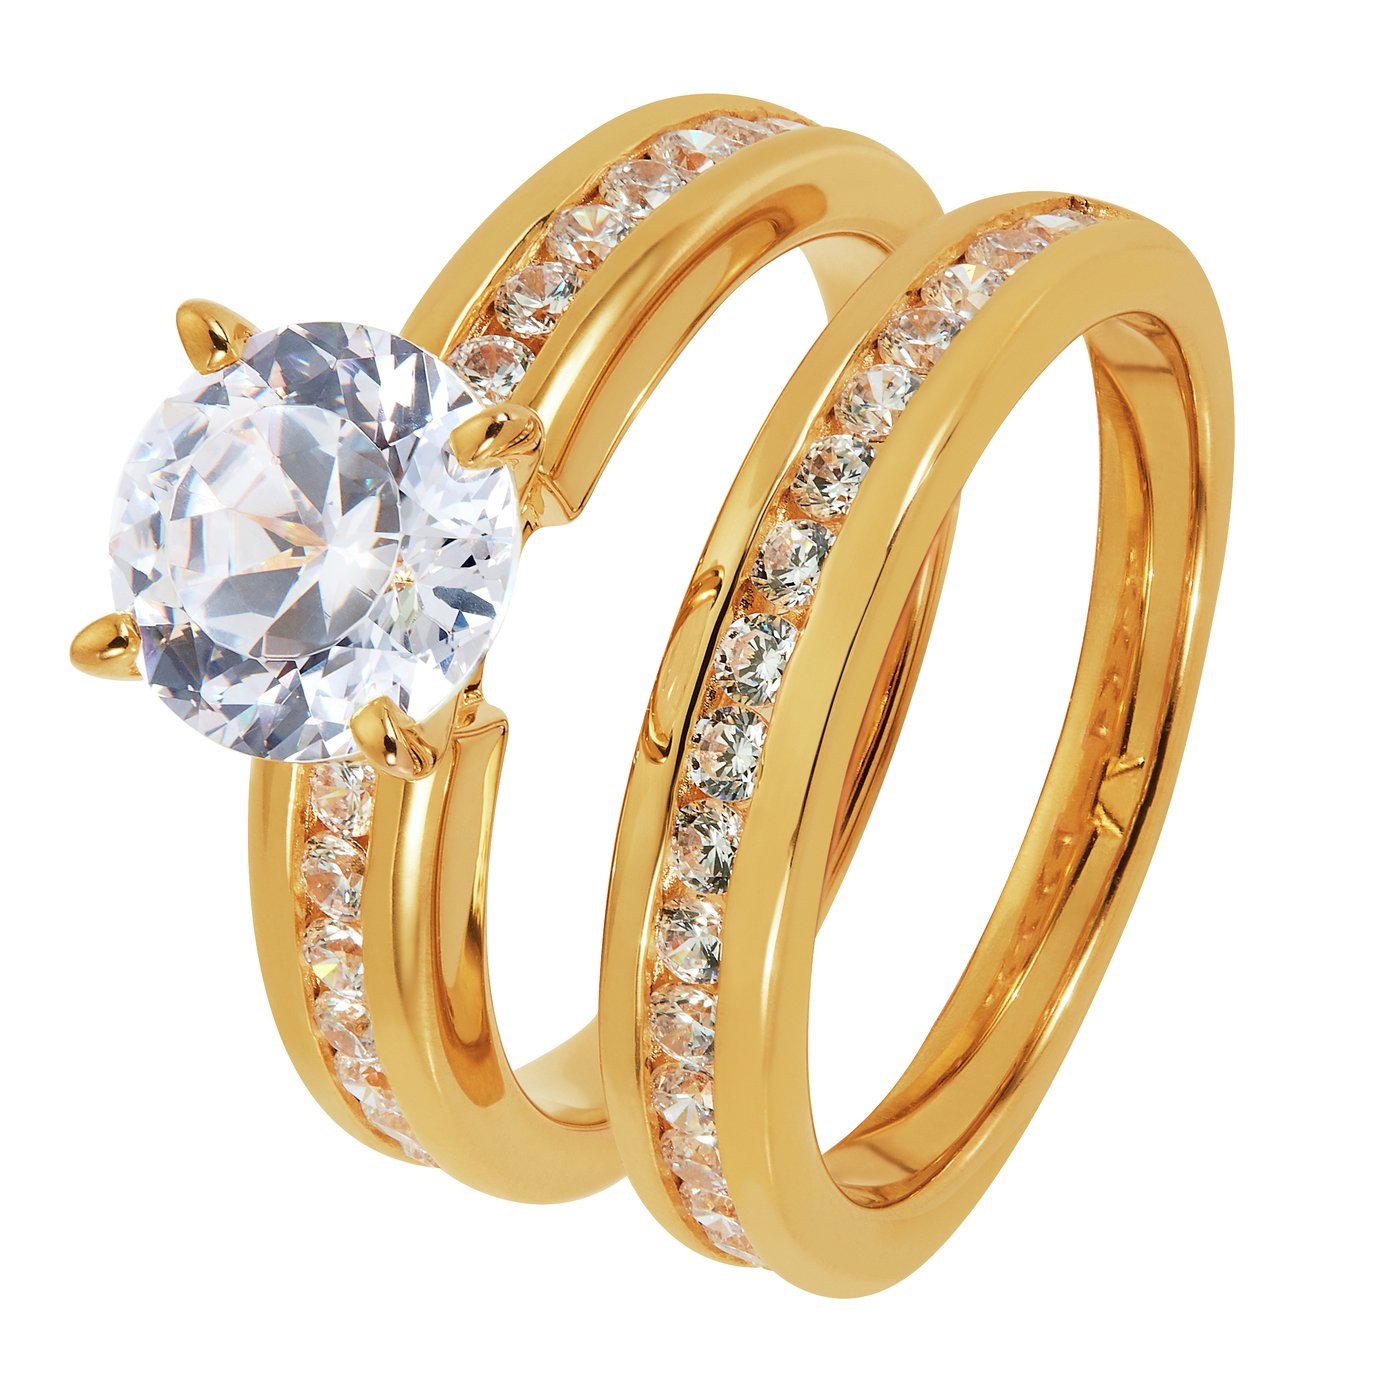 Revere 9ct Gold Plated Cubic Zirconia Bridal Ring Set - U